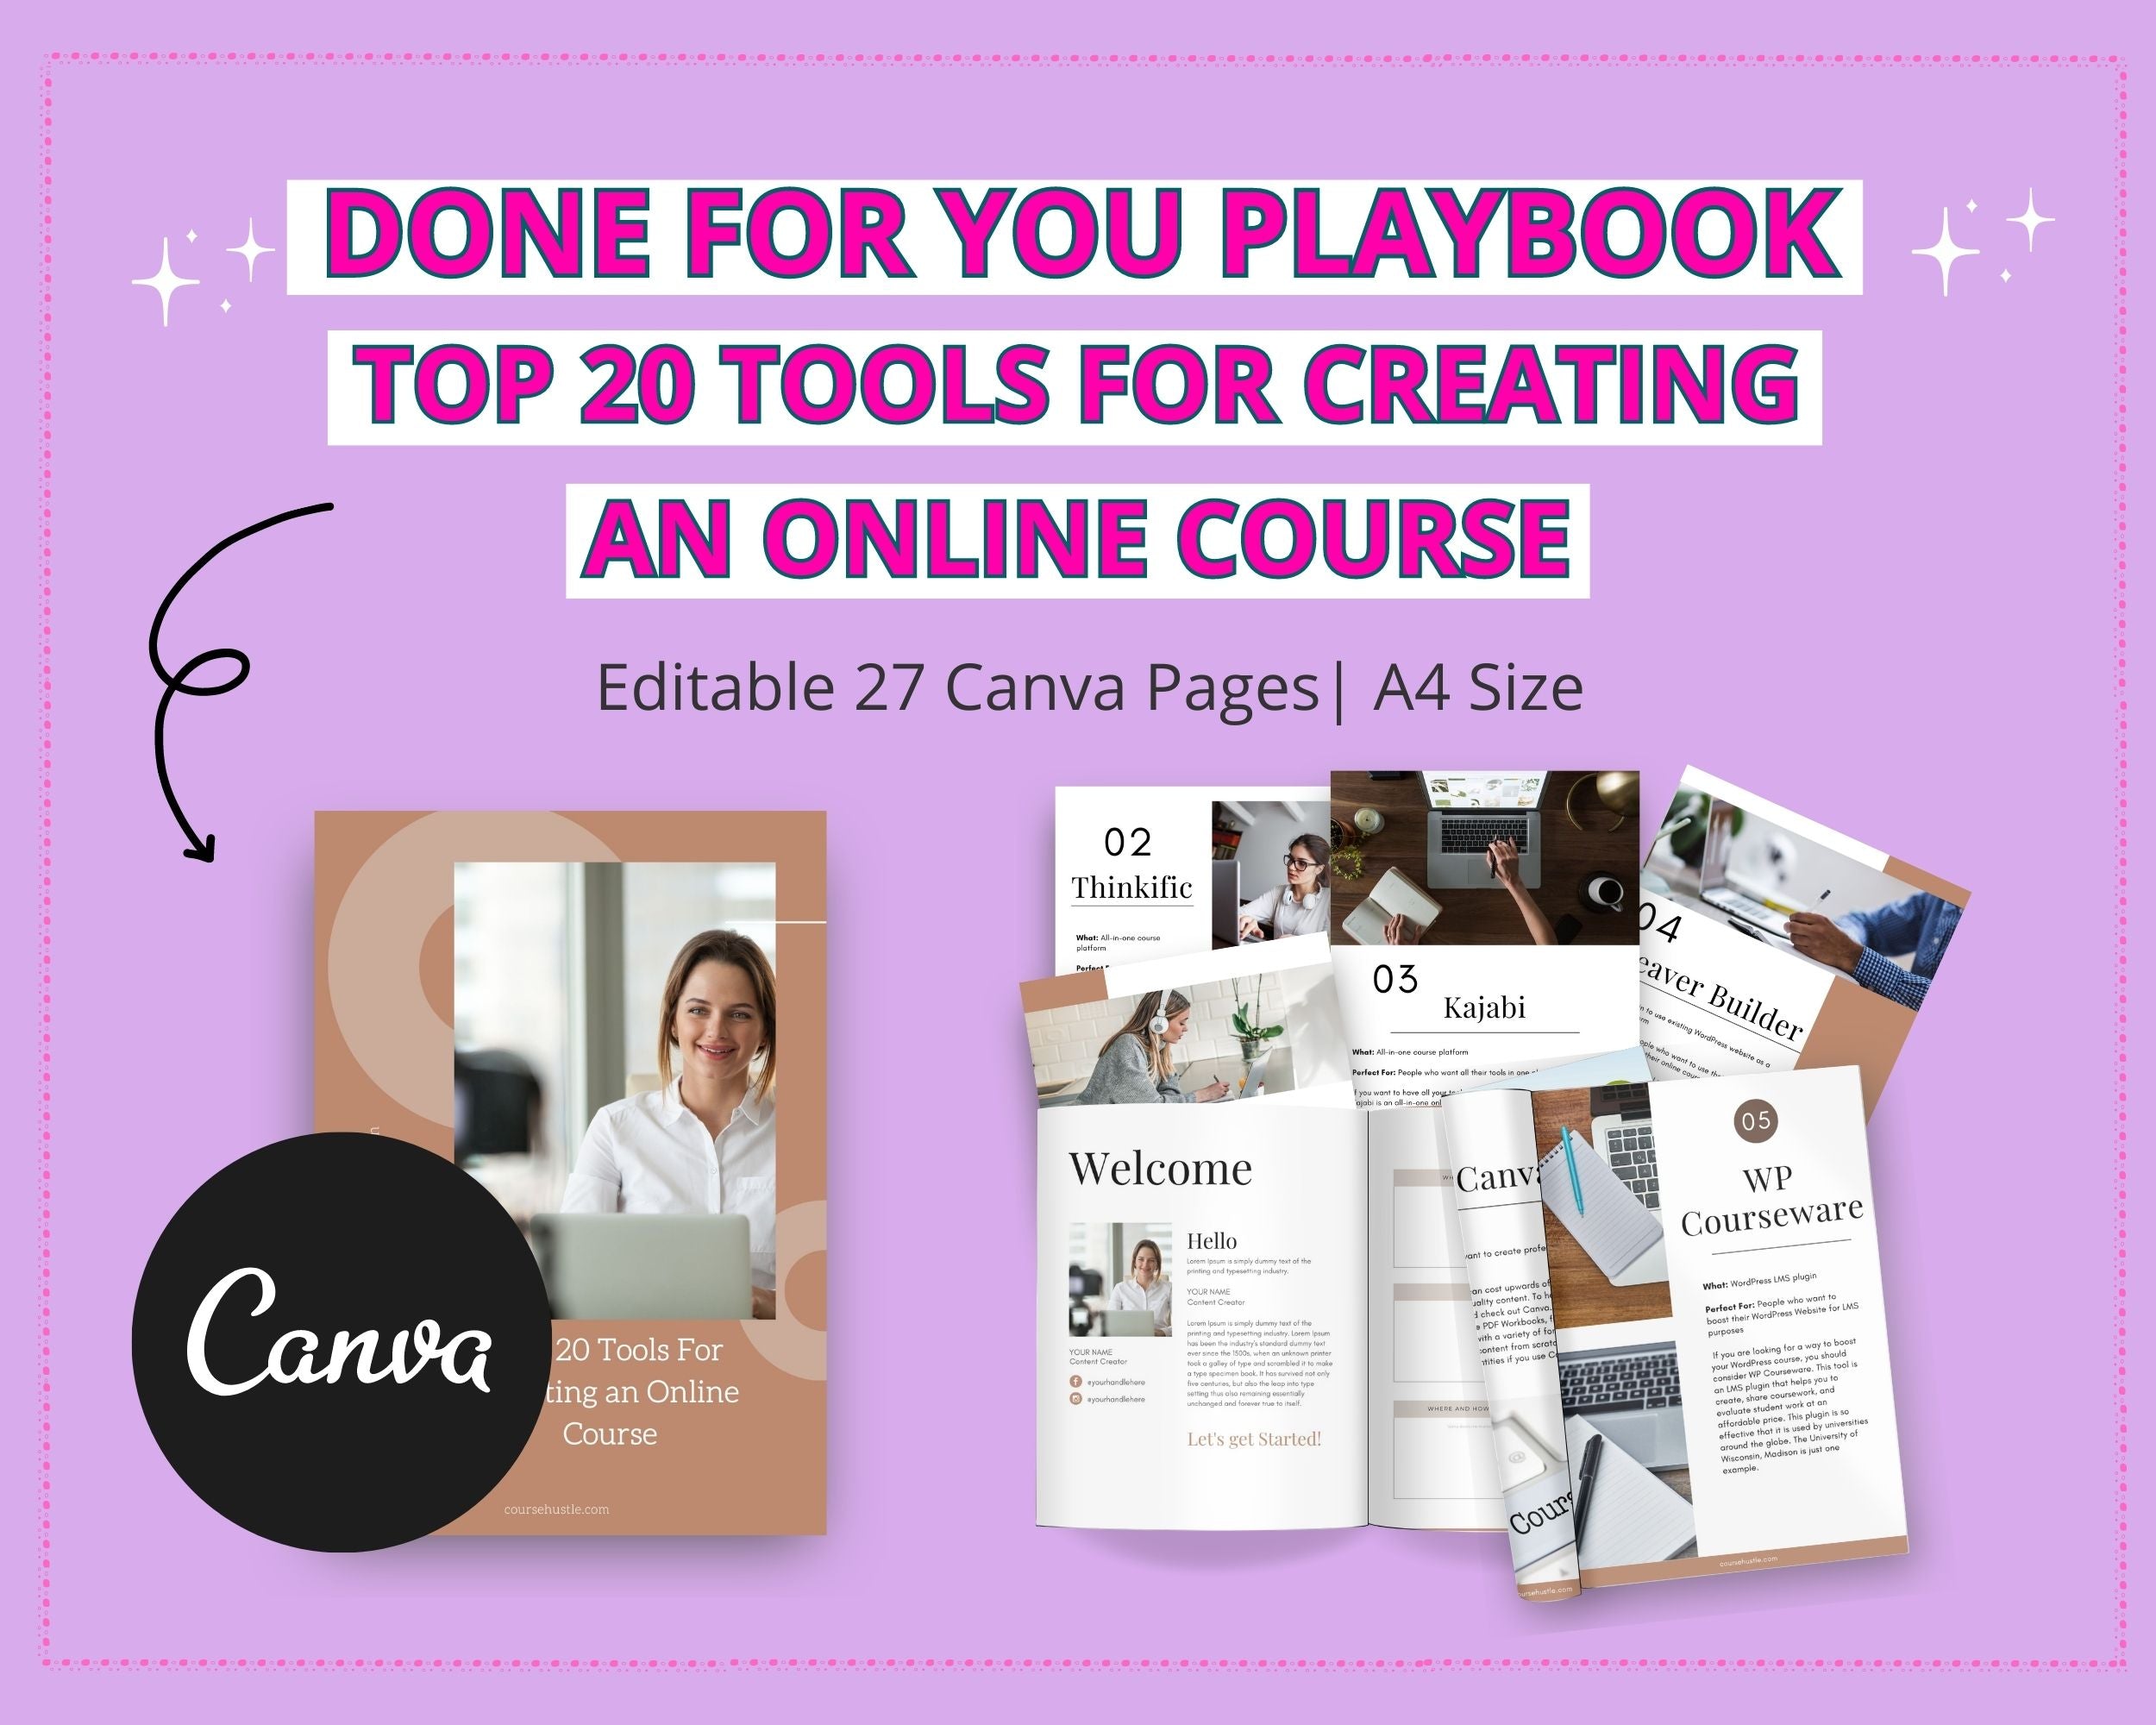 Done-for-You 20 Tools to Craft an Online Course Playbook in Canva